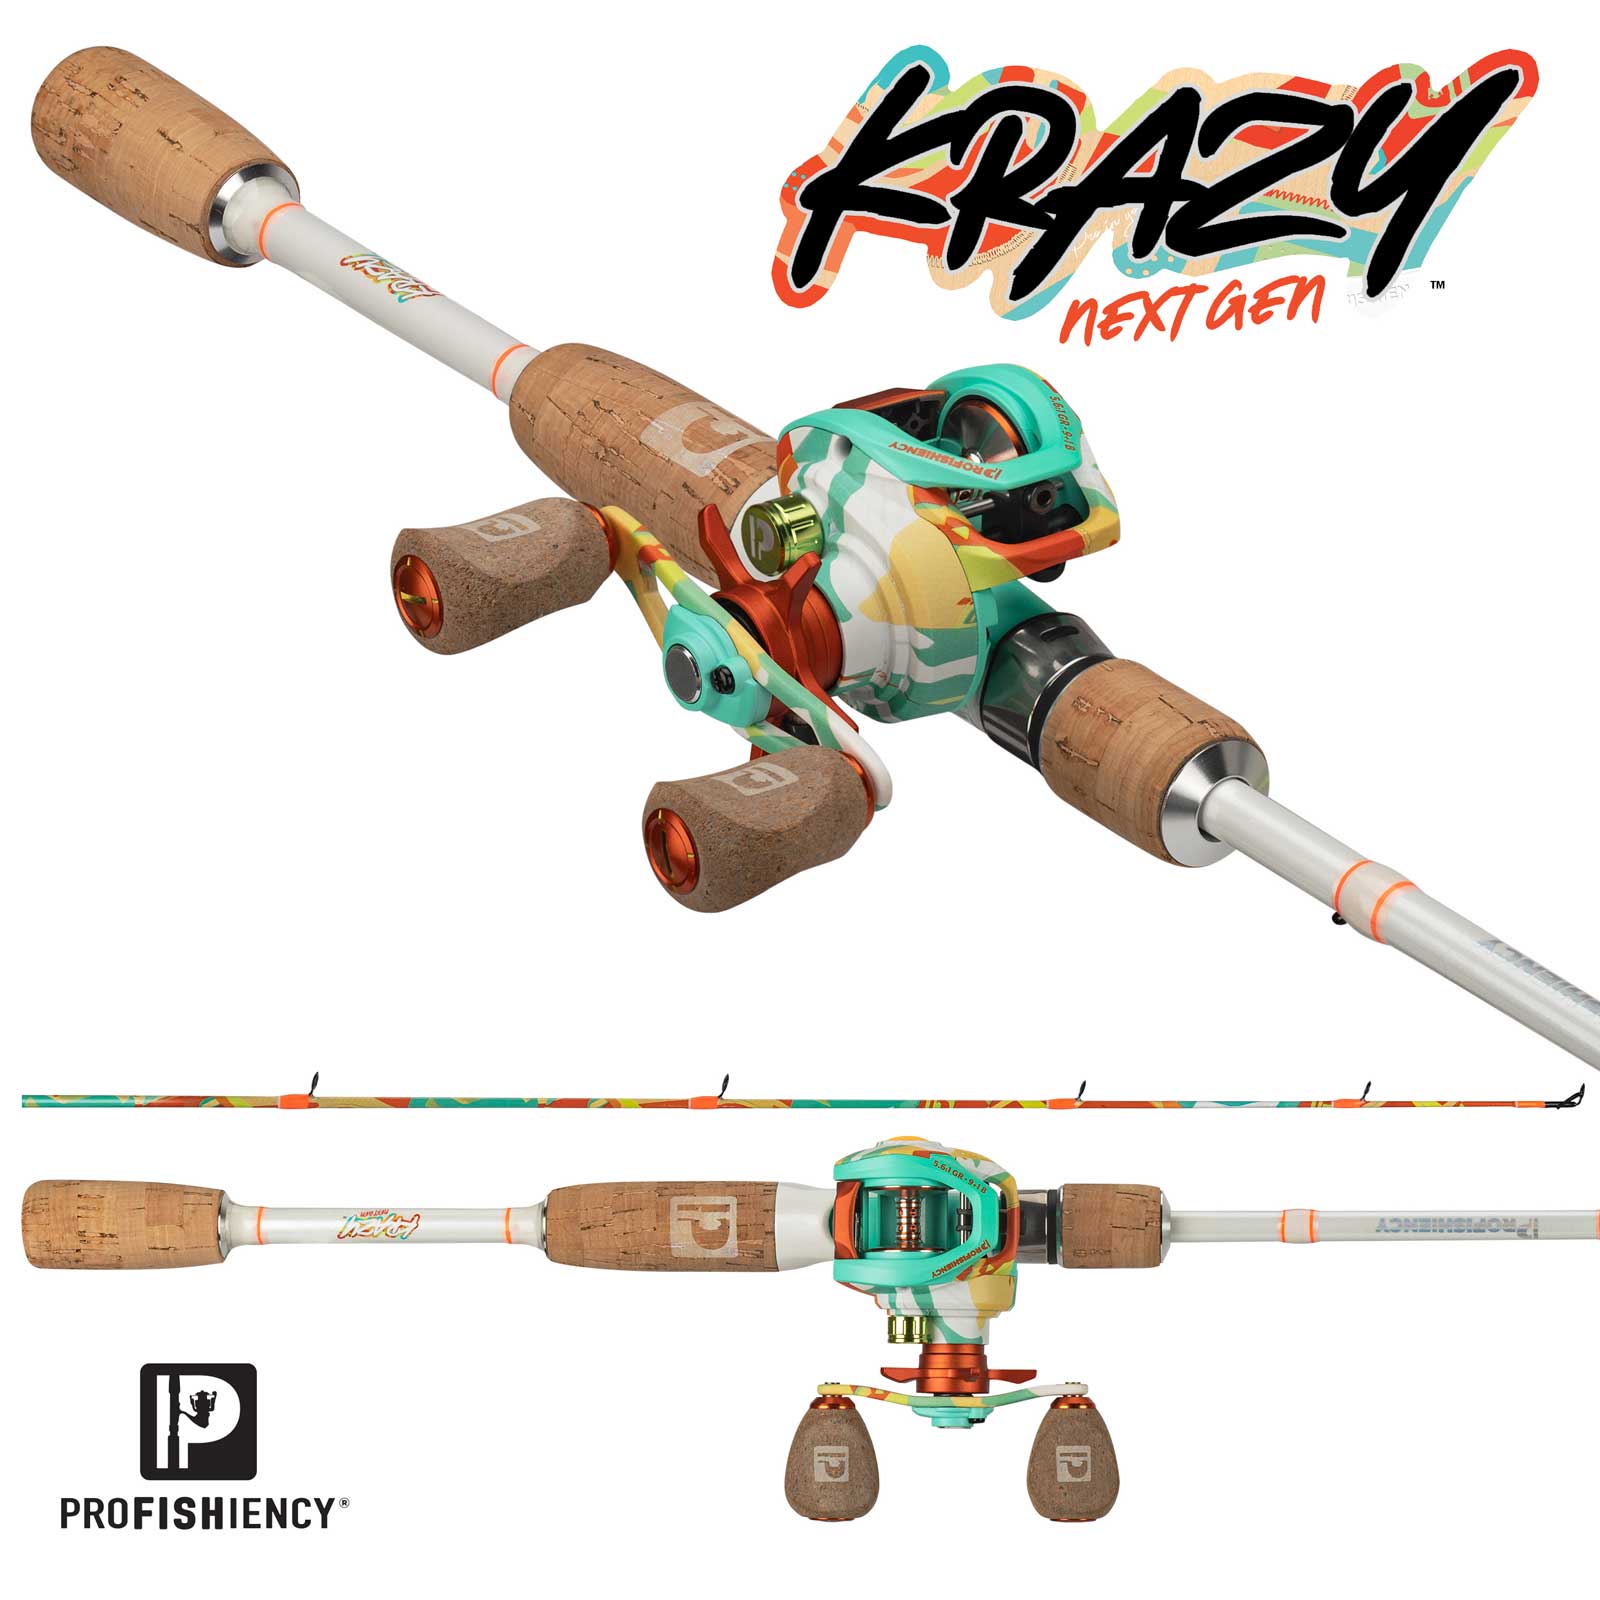 ProFISHiency Next Gen Krazy Combo by Anything Possible Brands